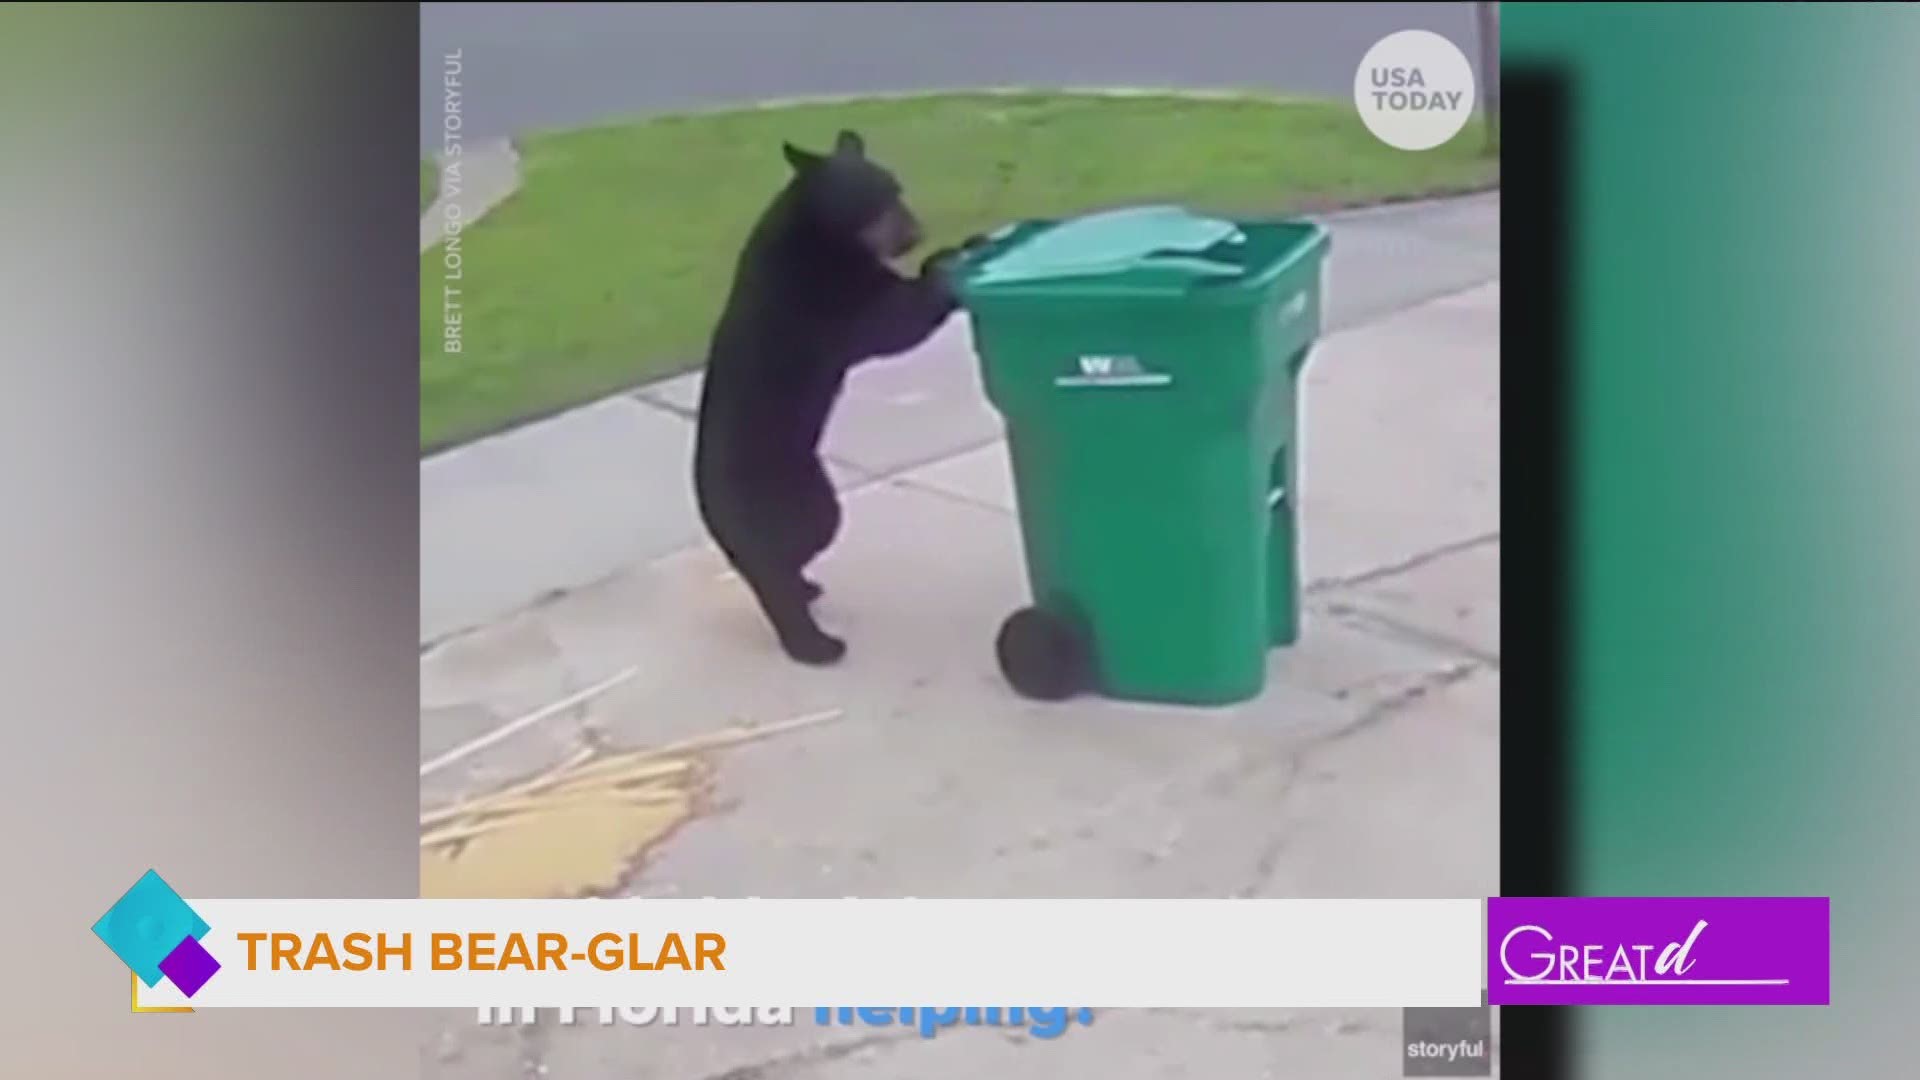 Today's Pawsitive news involves an ostrich and a bear who are both up to no good.